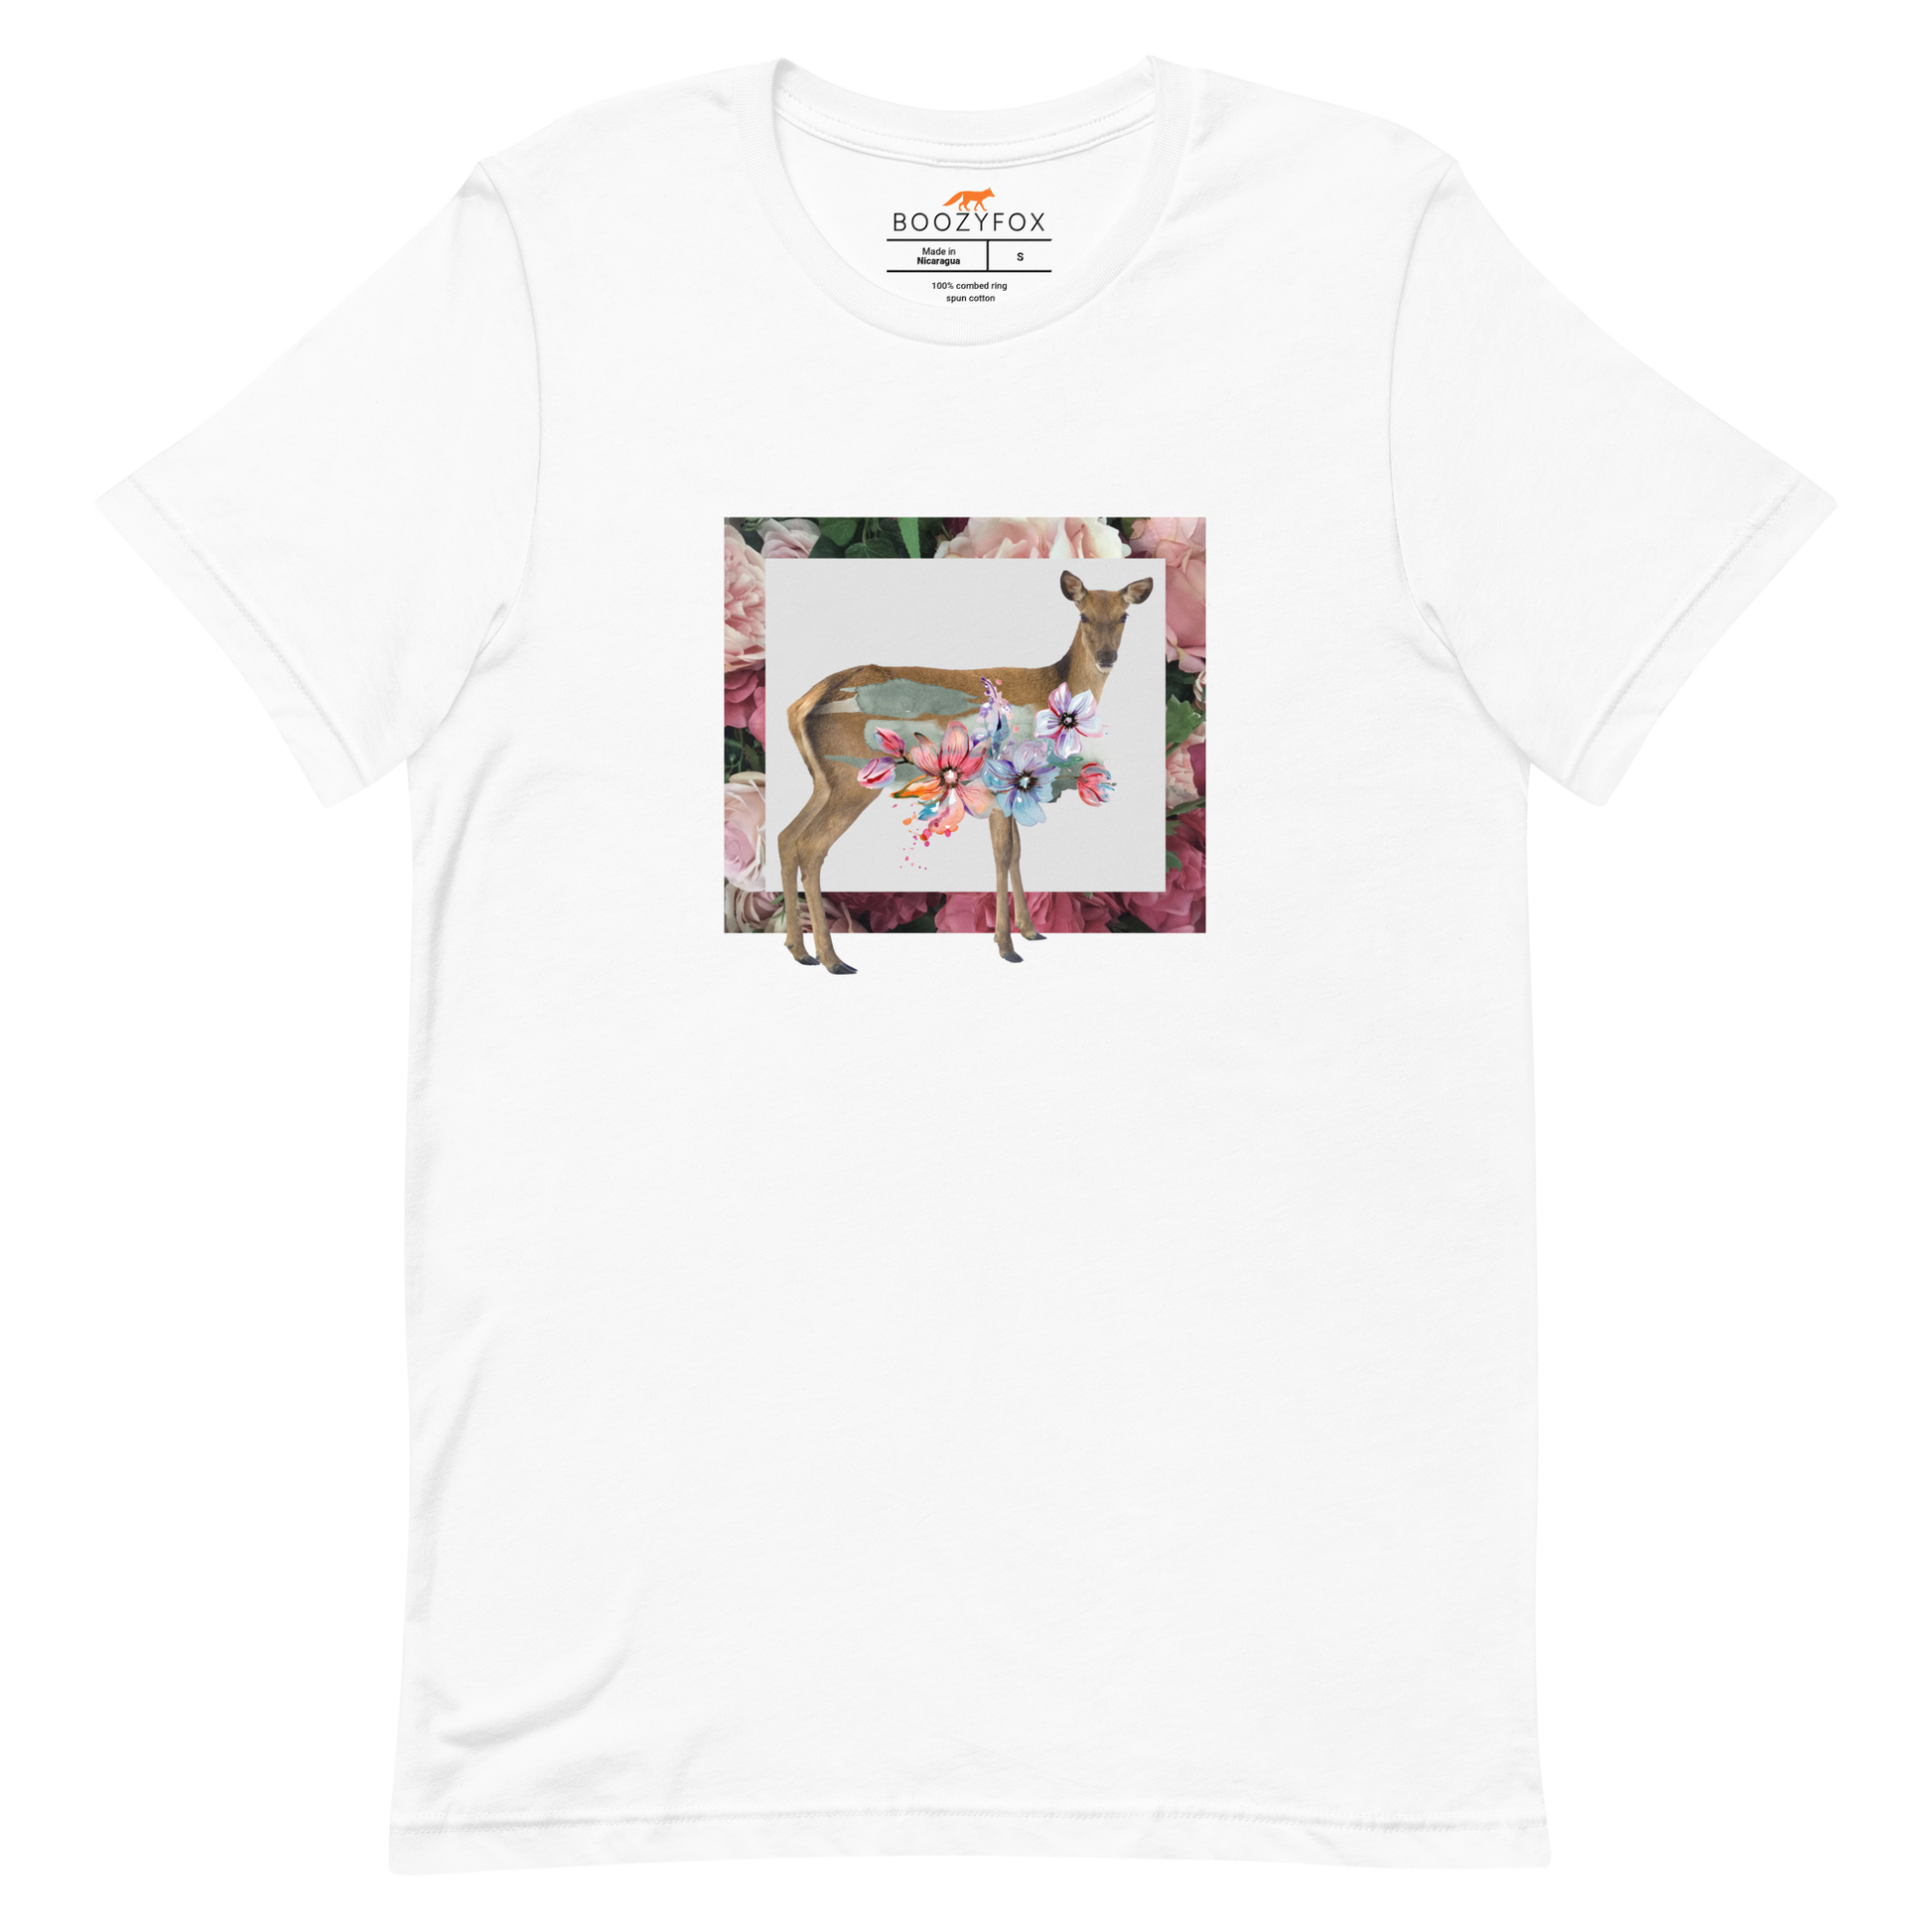 White Premium Deer T-Shirt featuring a stunning Floral Deer graphic on the chest - Cute Graphic Deer Tees - Boozy Fox